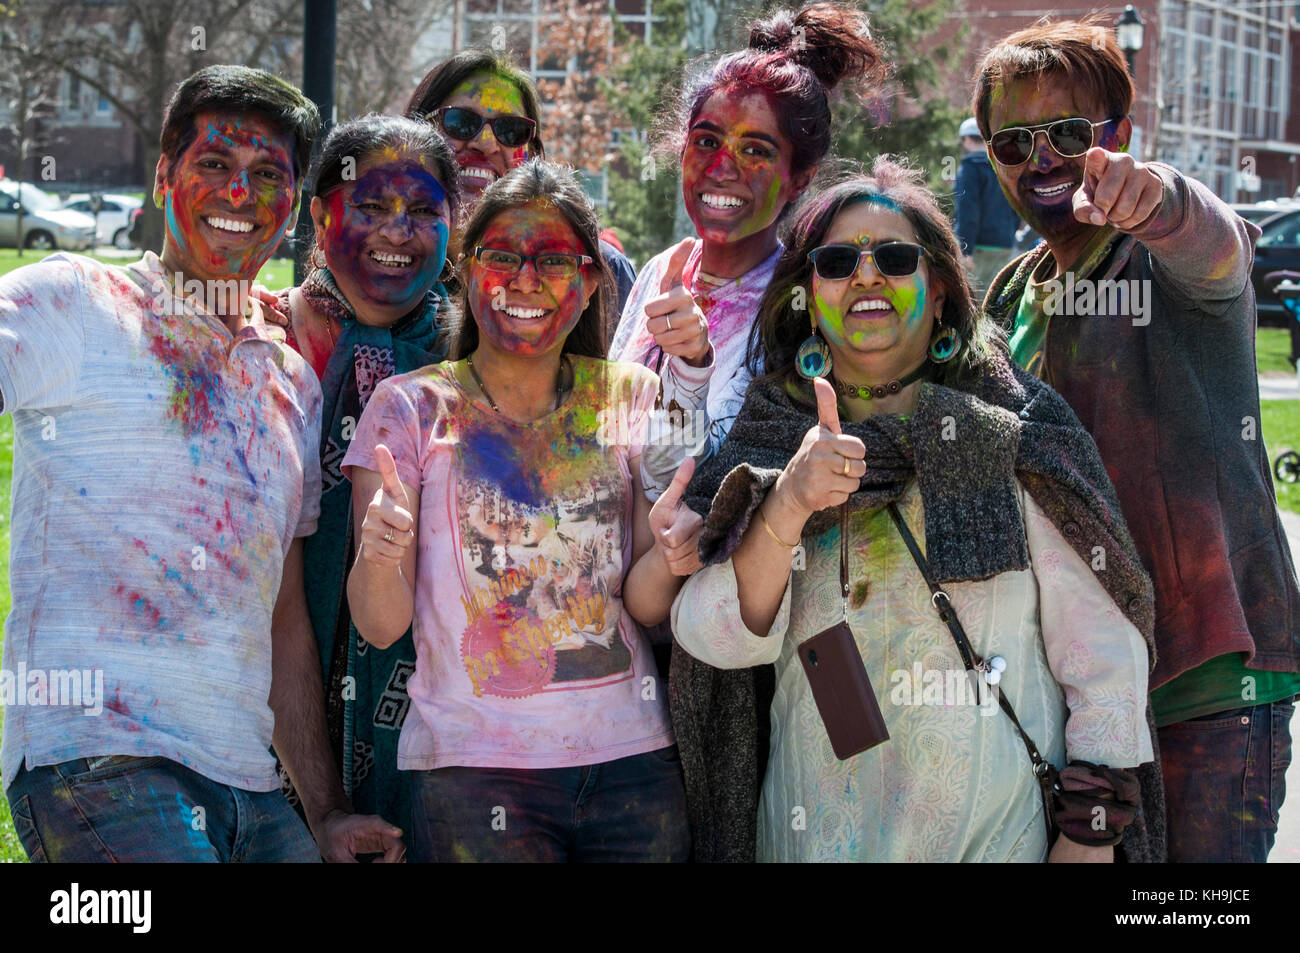 Holi is a Hindu spring festival originally celebrated in India and